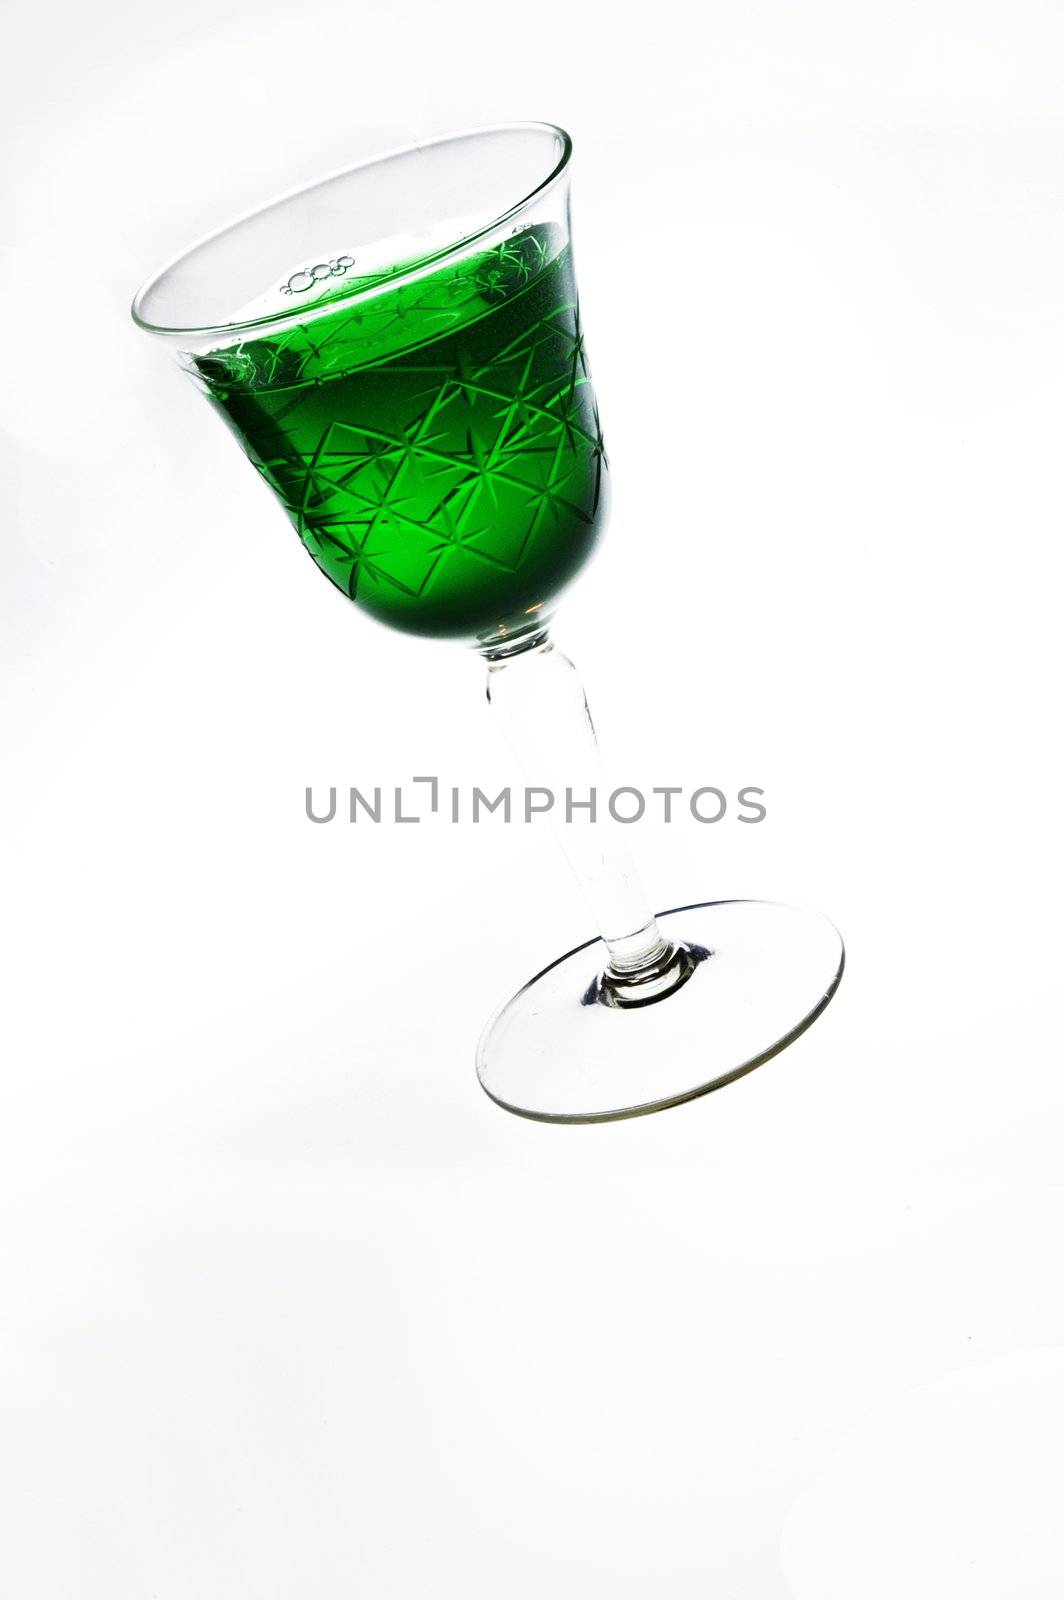 The Green Fairy by Michalowski